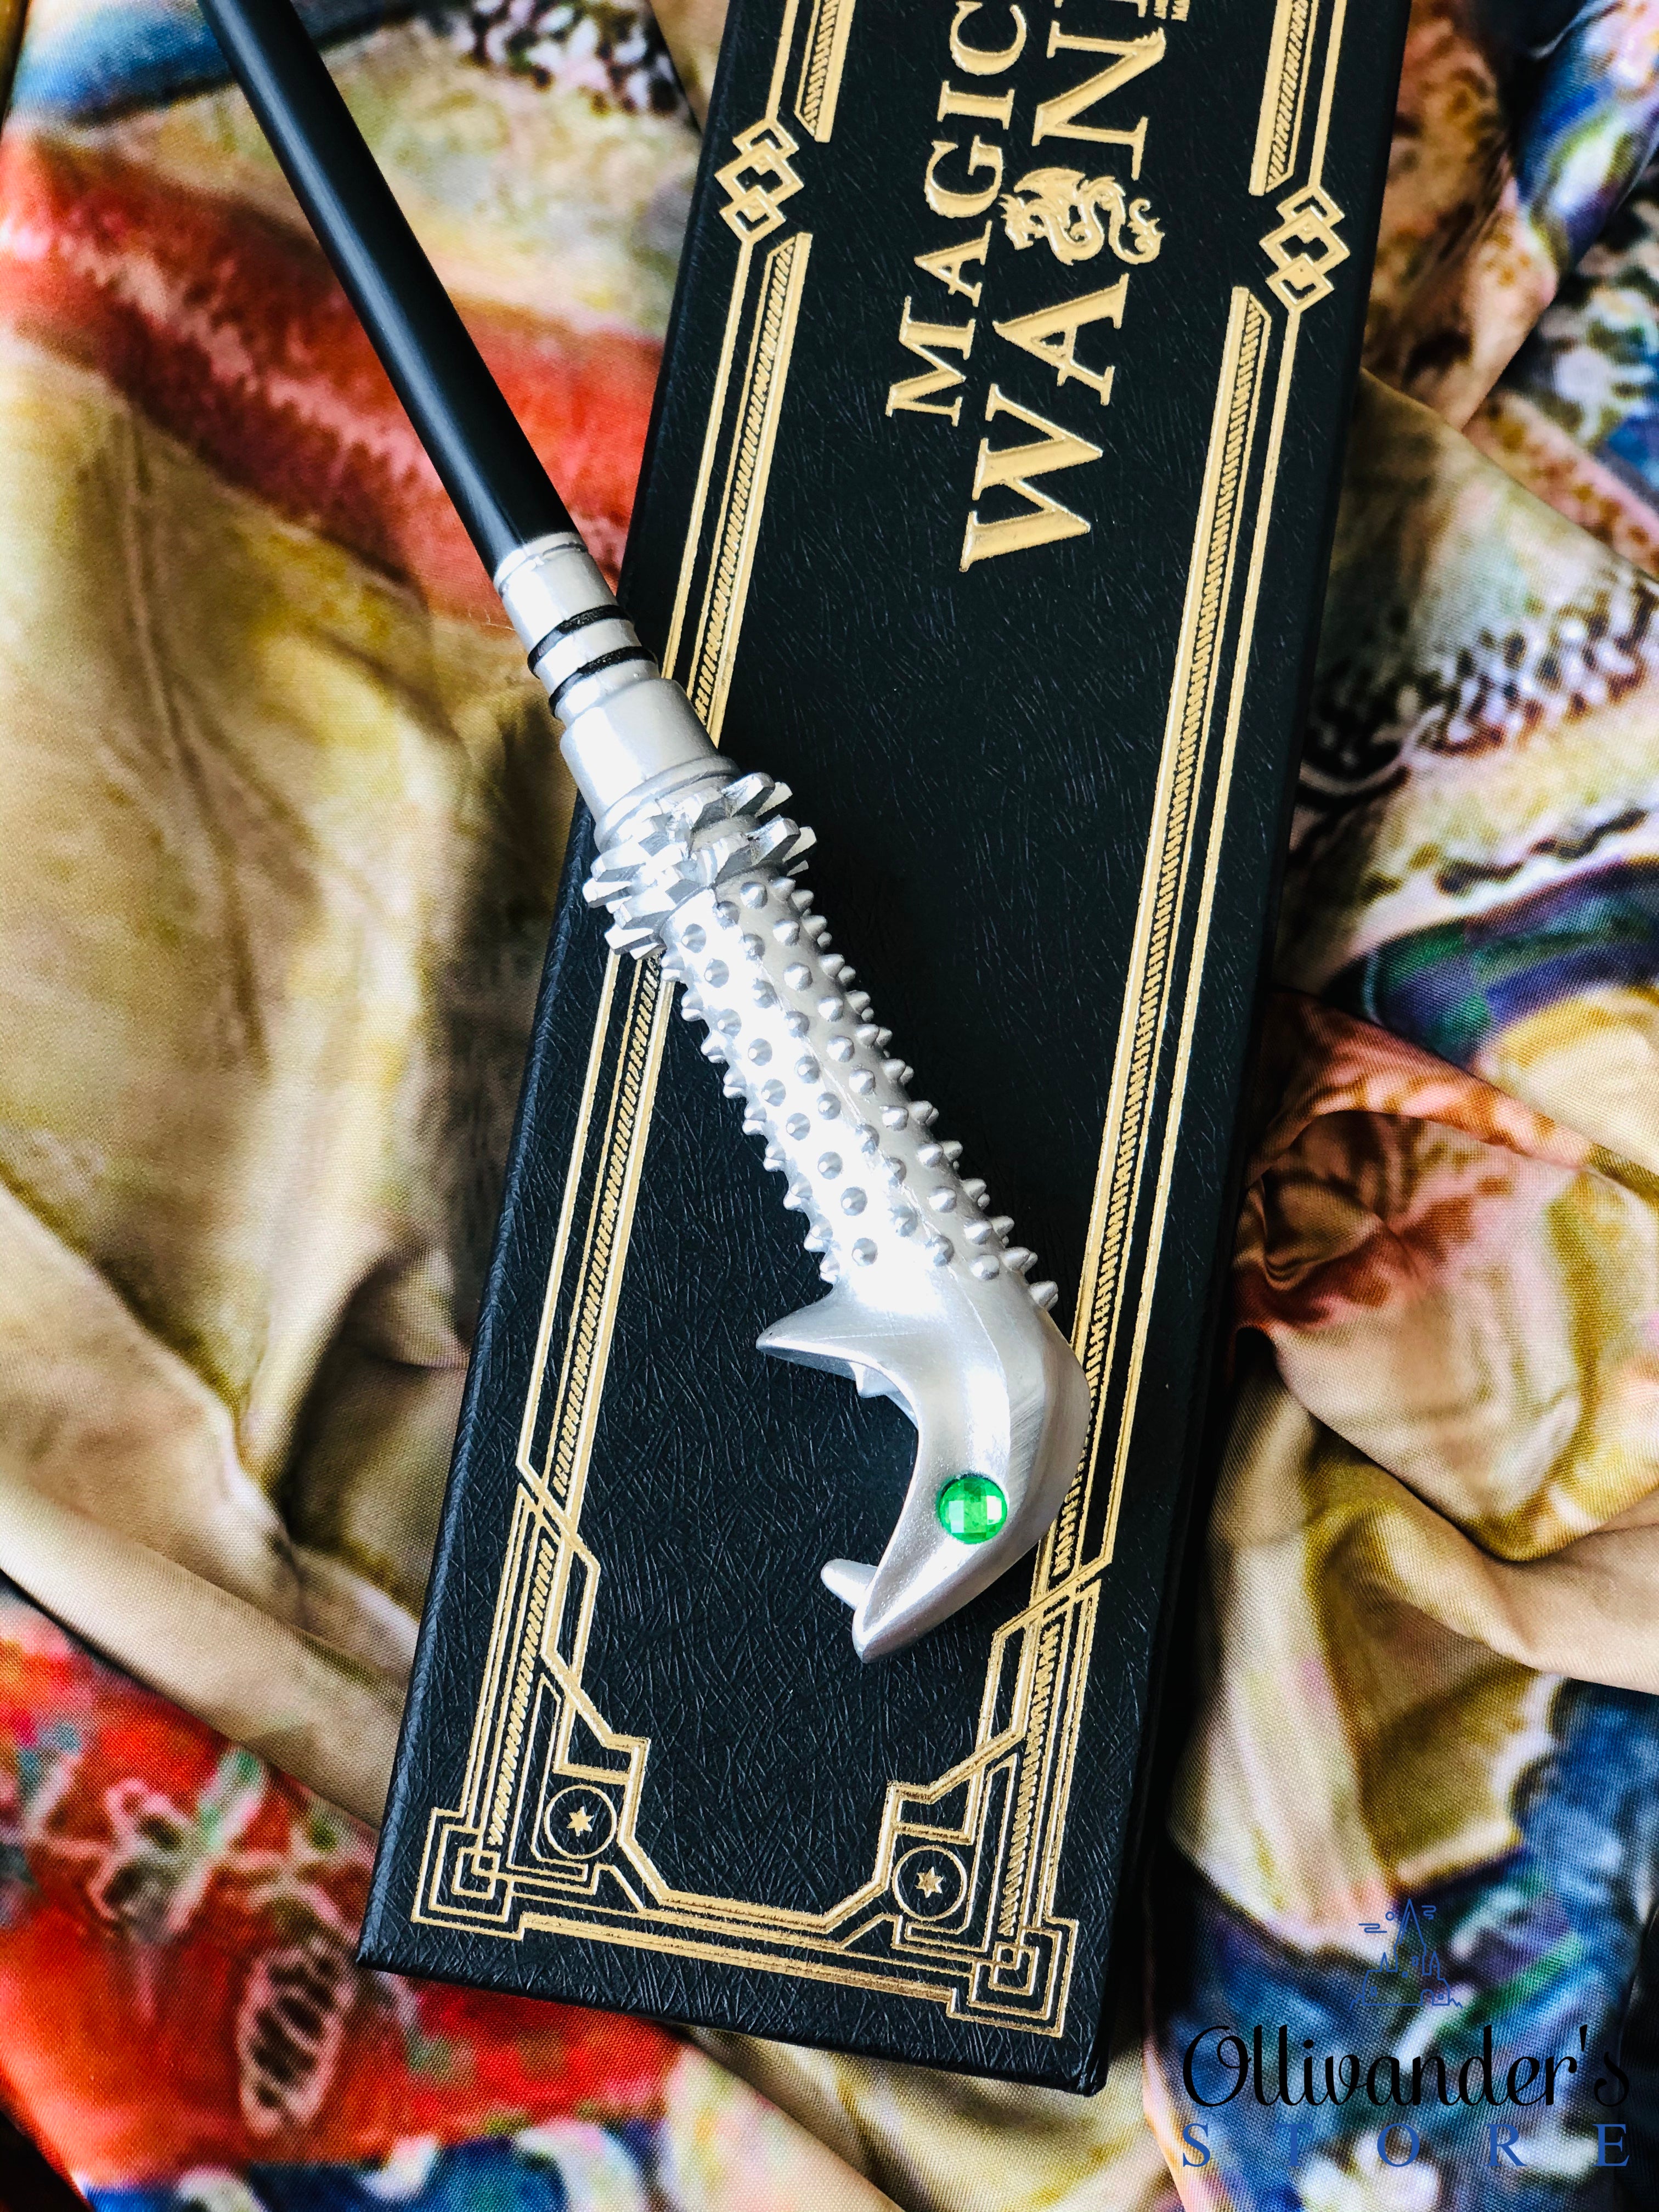 Lucius Malfoy's collectible wand